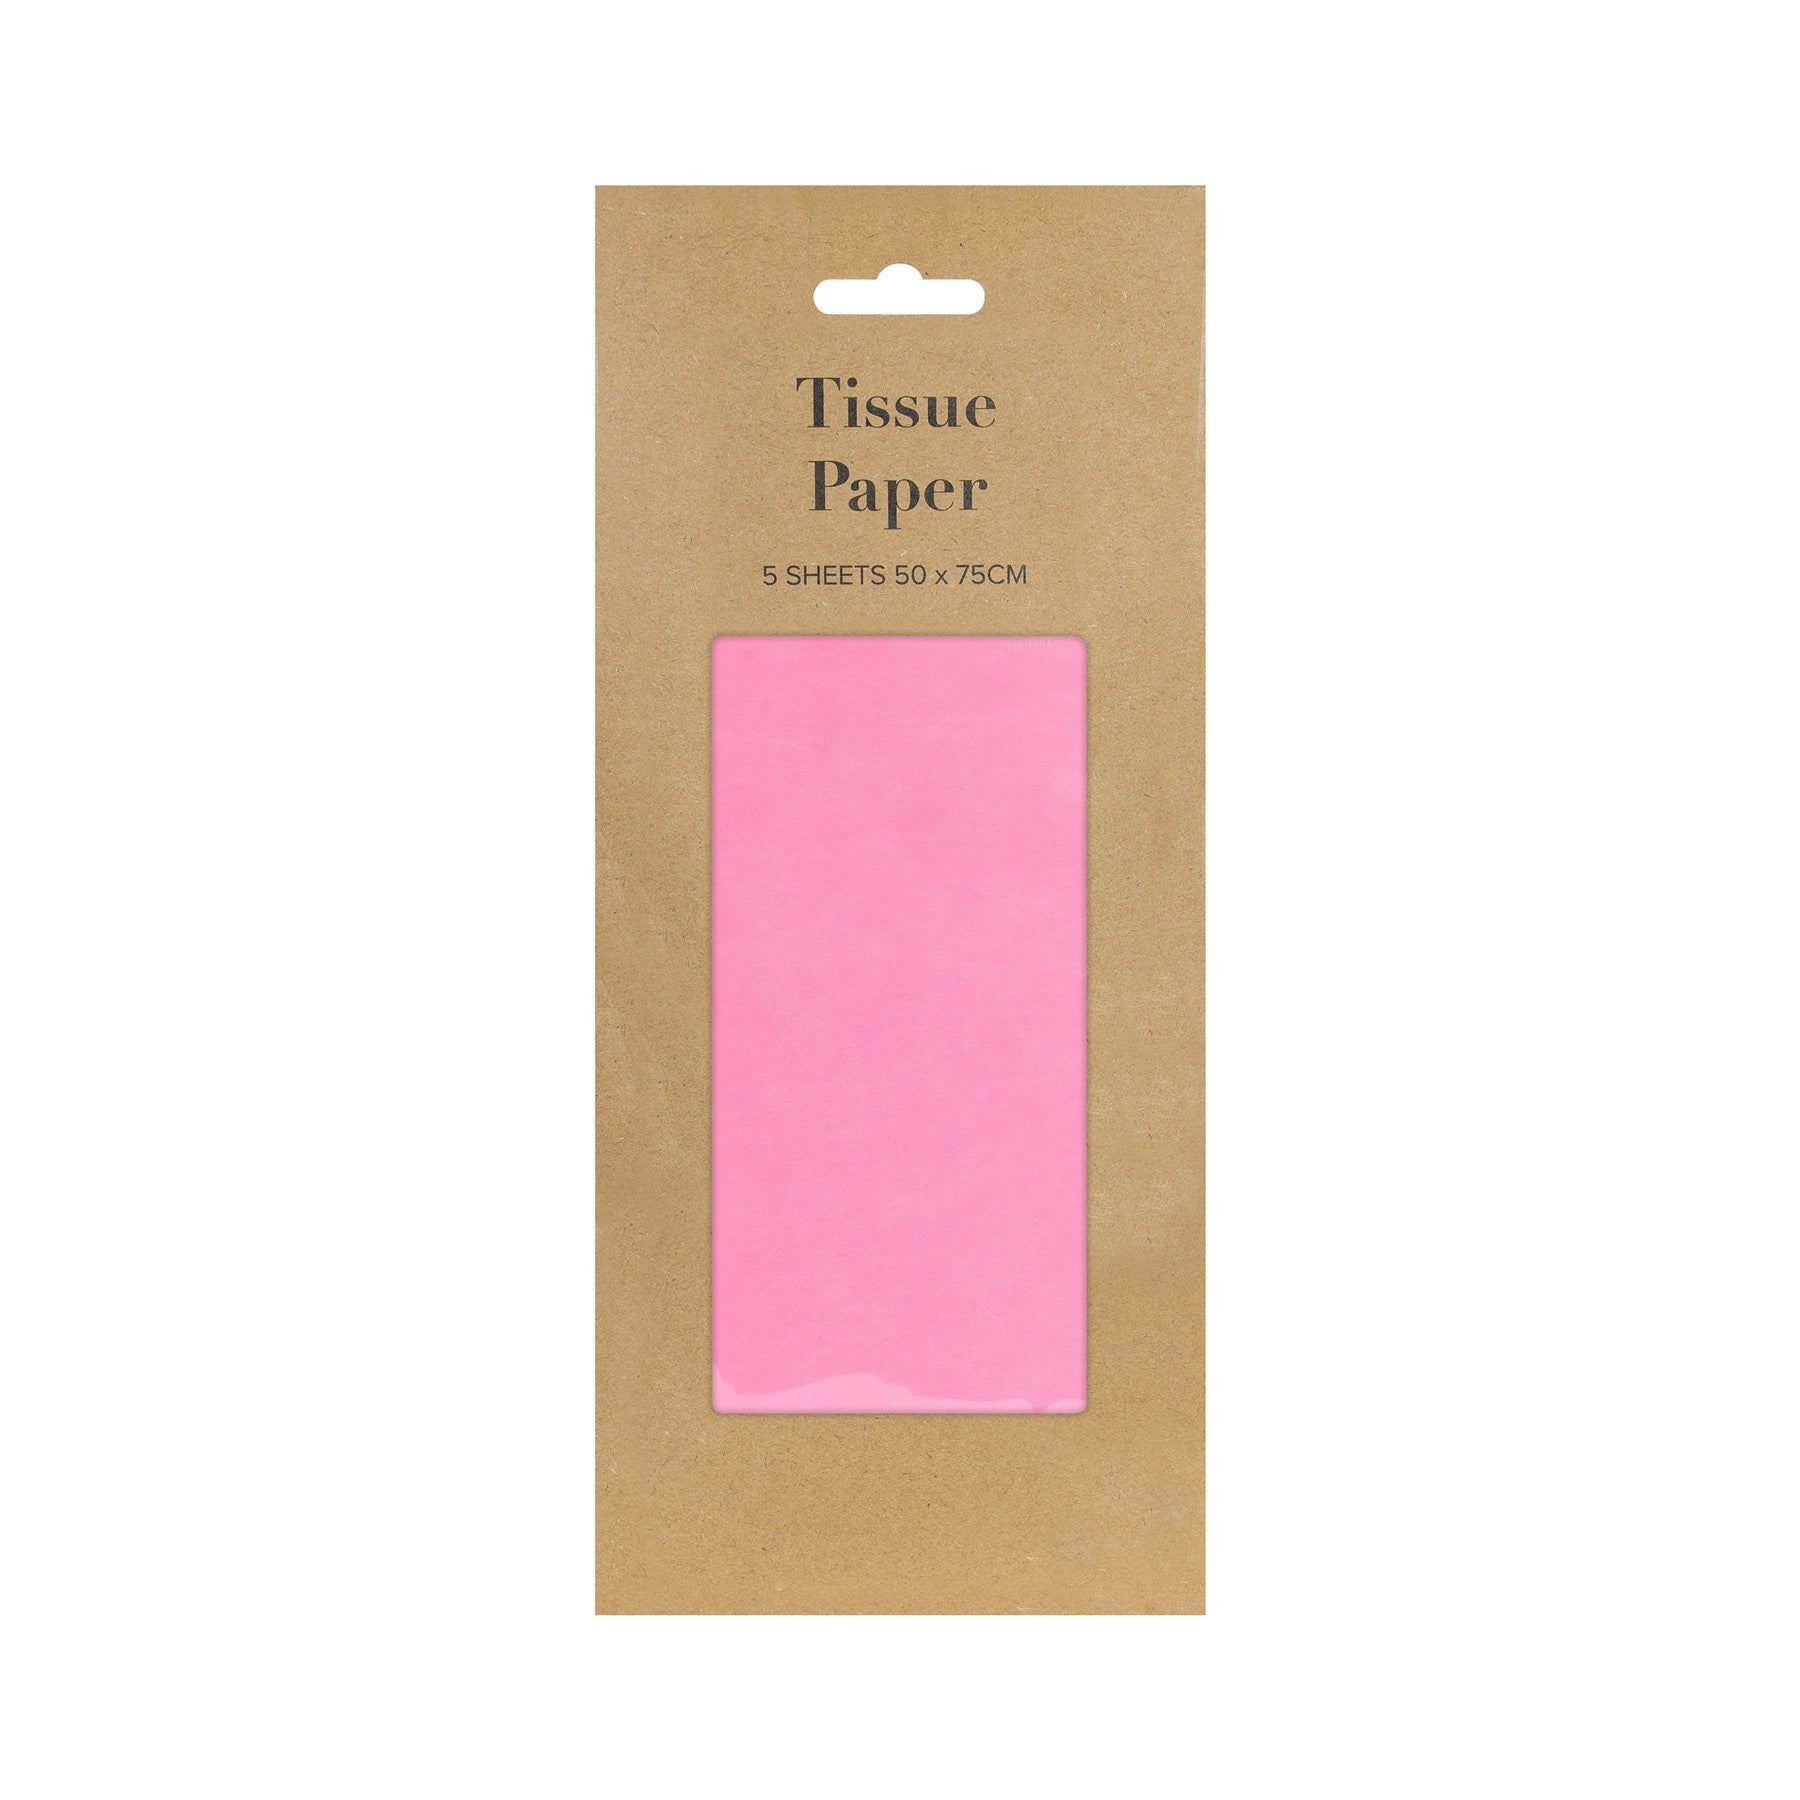 View Pink Tissue Paper Pack 5 Sheets information